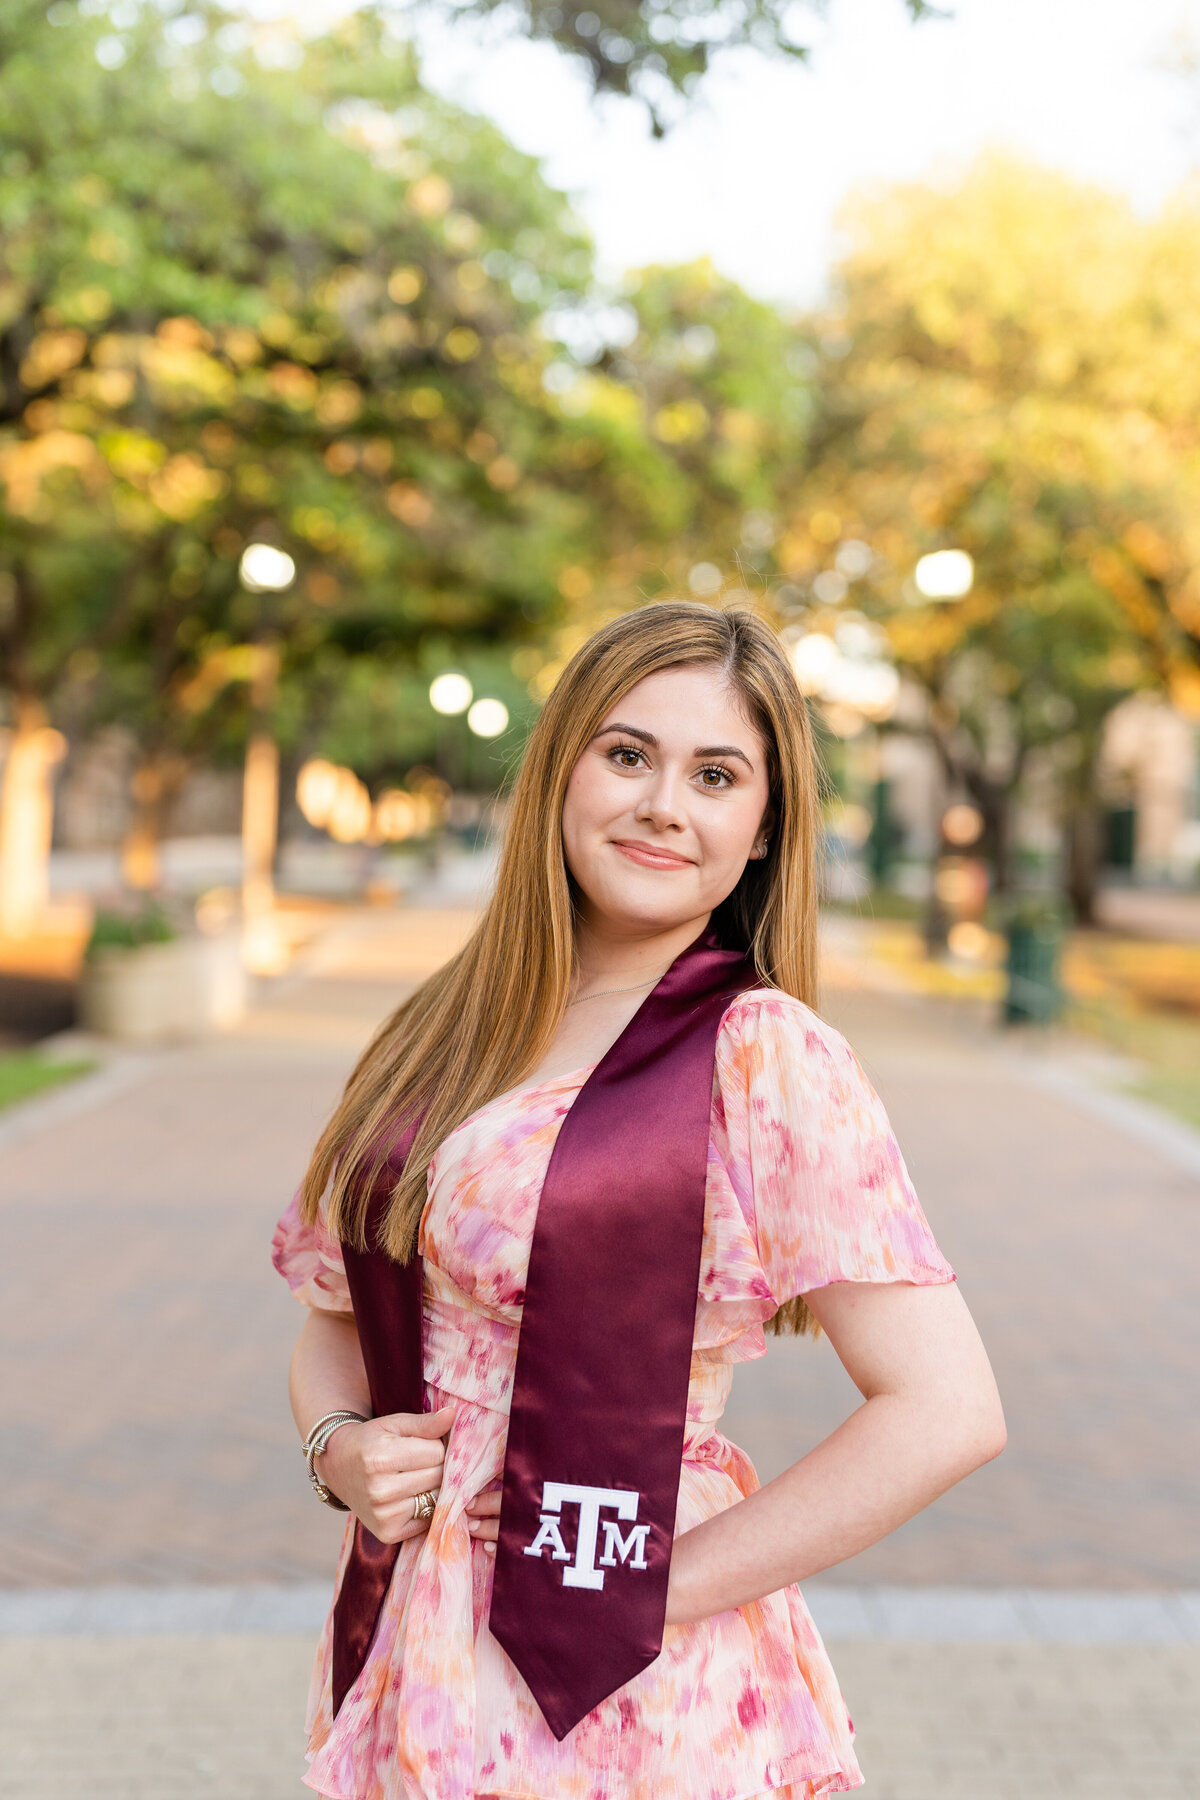 Texas A&M senior girl smiling with hand on hip while wearing pink colorful dress and maroon stole in Military Plaza